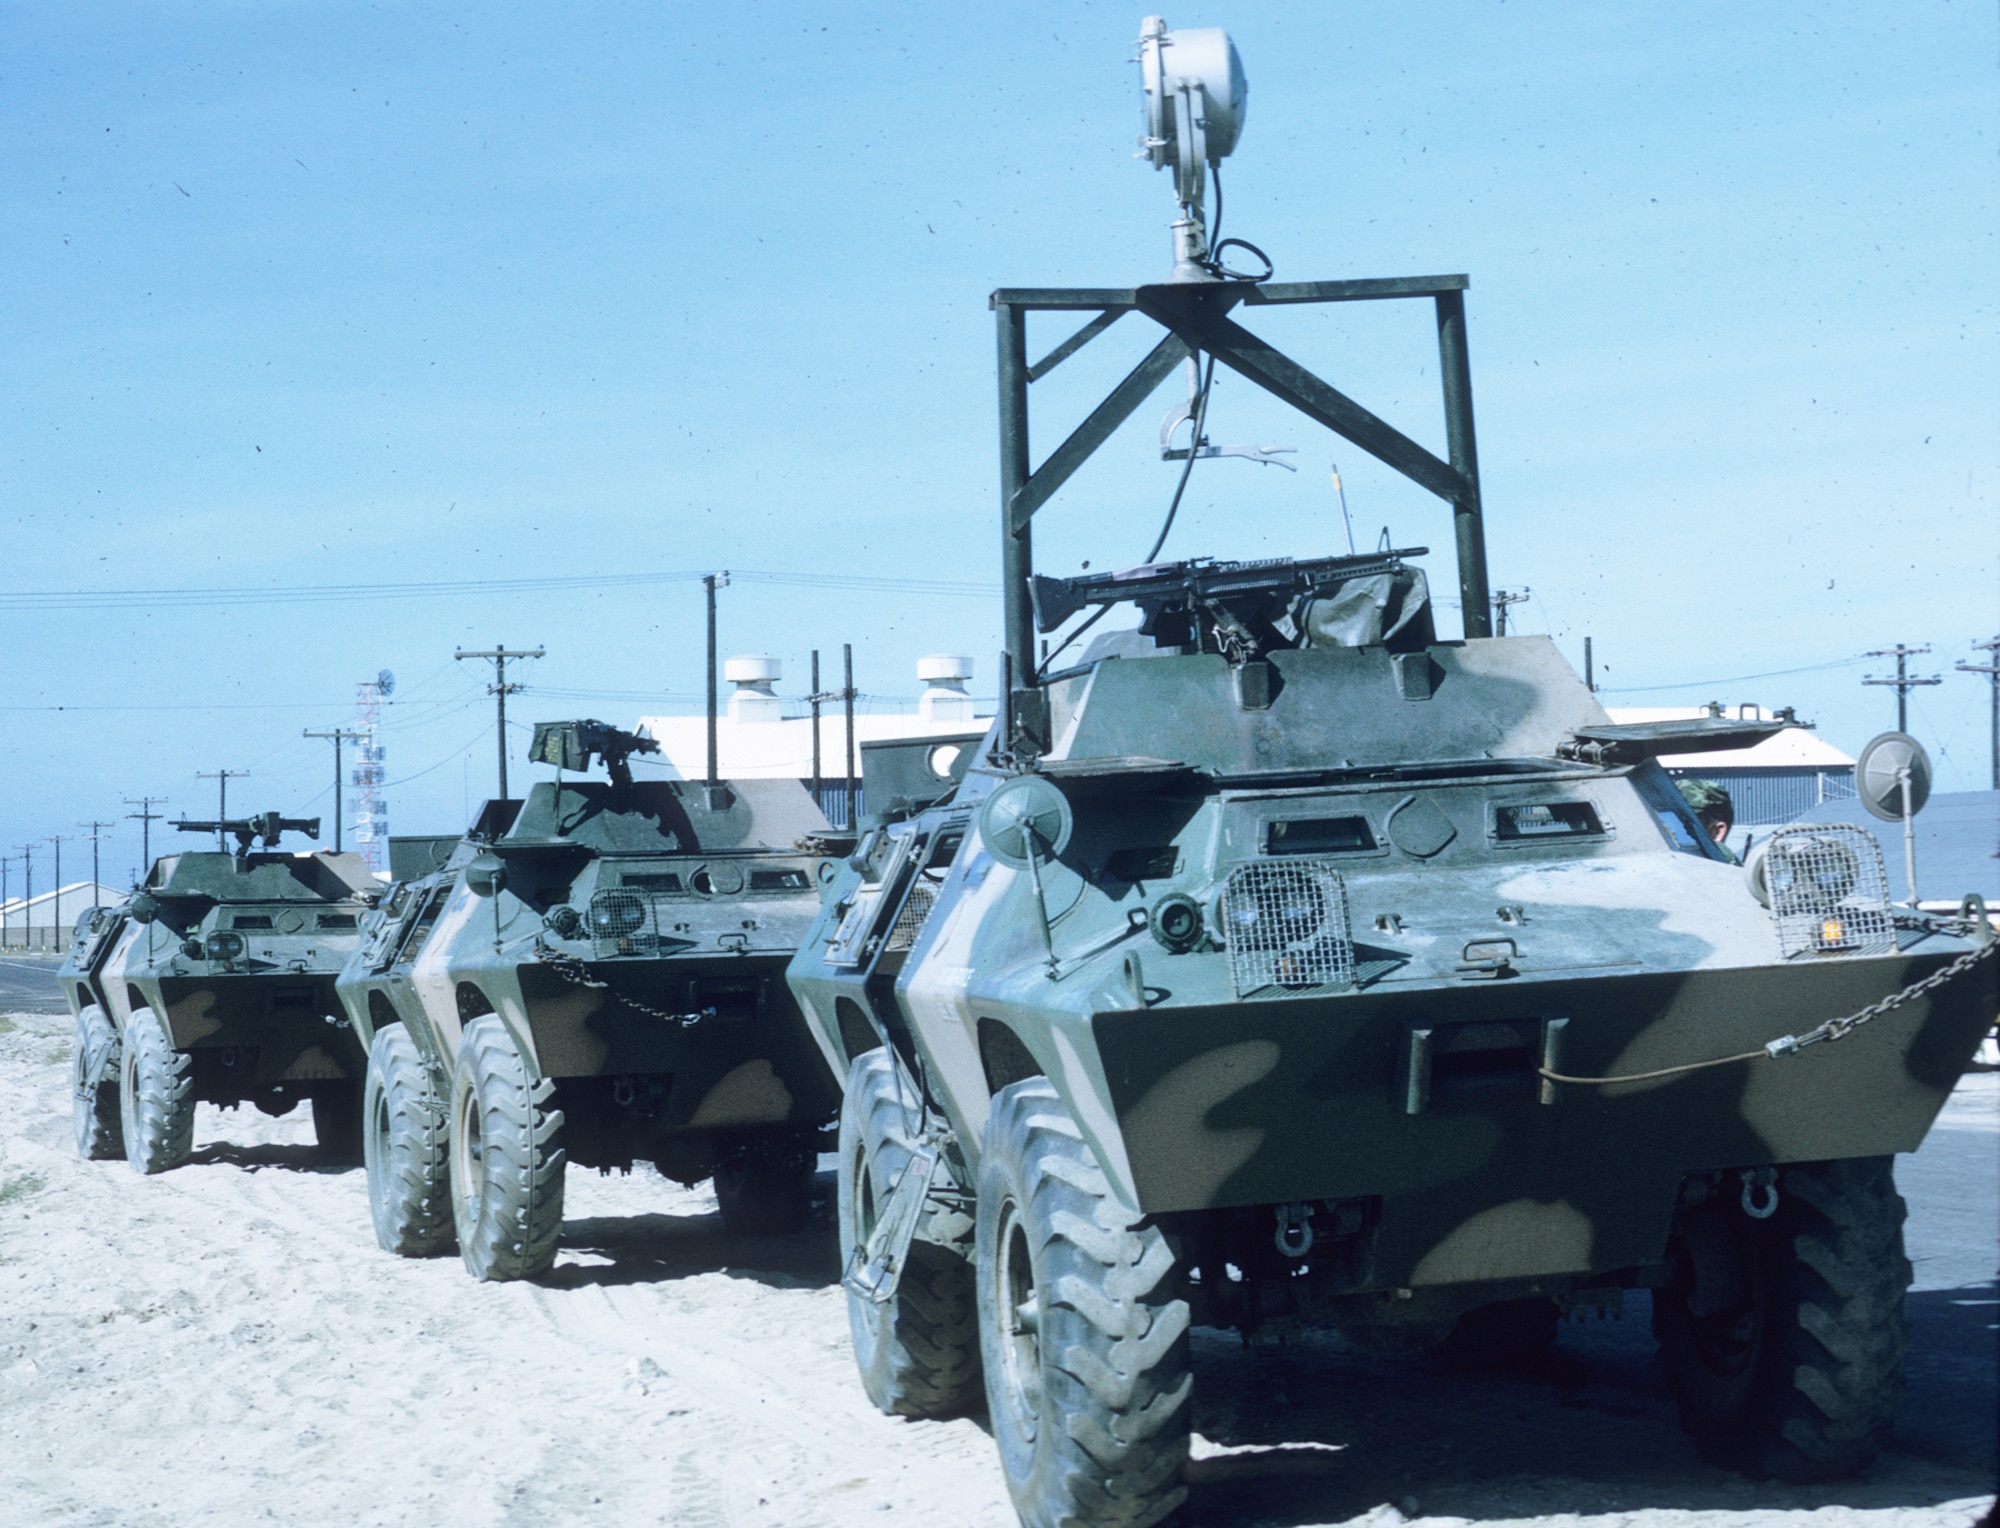 Security Police finally started receiving badly-needed armored vehicles in late 1968.  Pictured here are V-100 armored personnel carriers. The one in the front is also equipped with a searchlight. (U.S. Air Force photo).